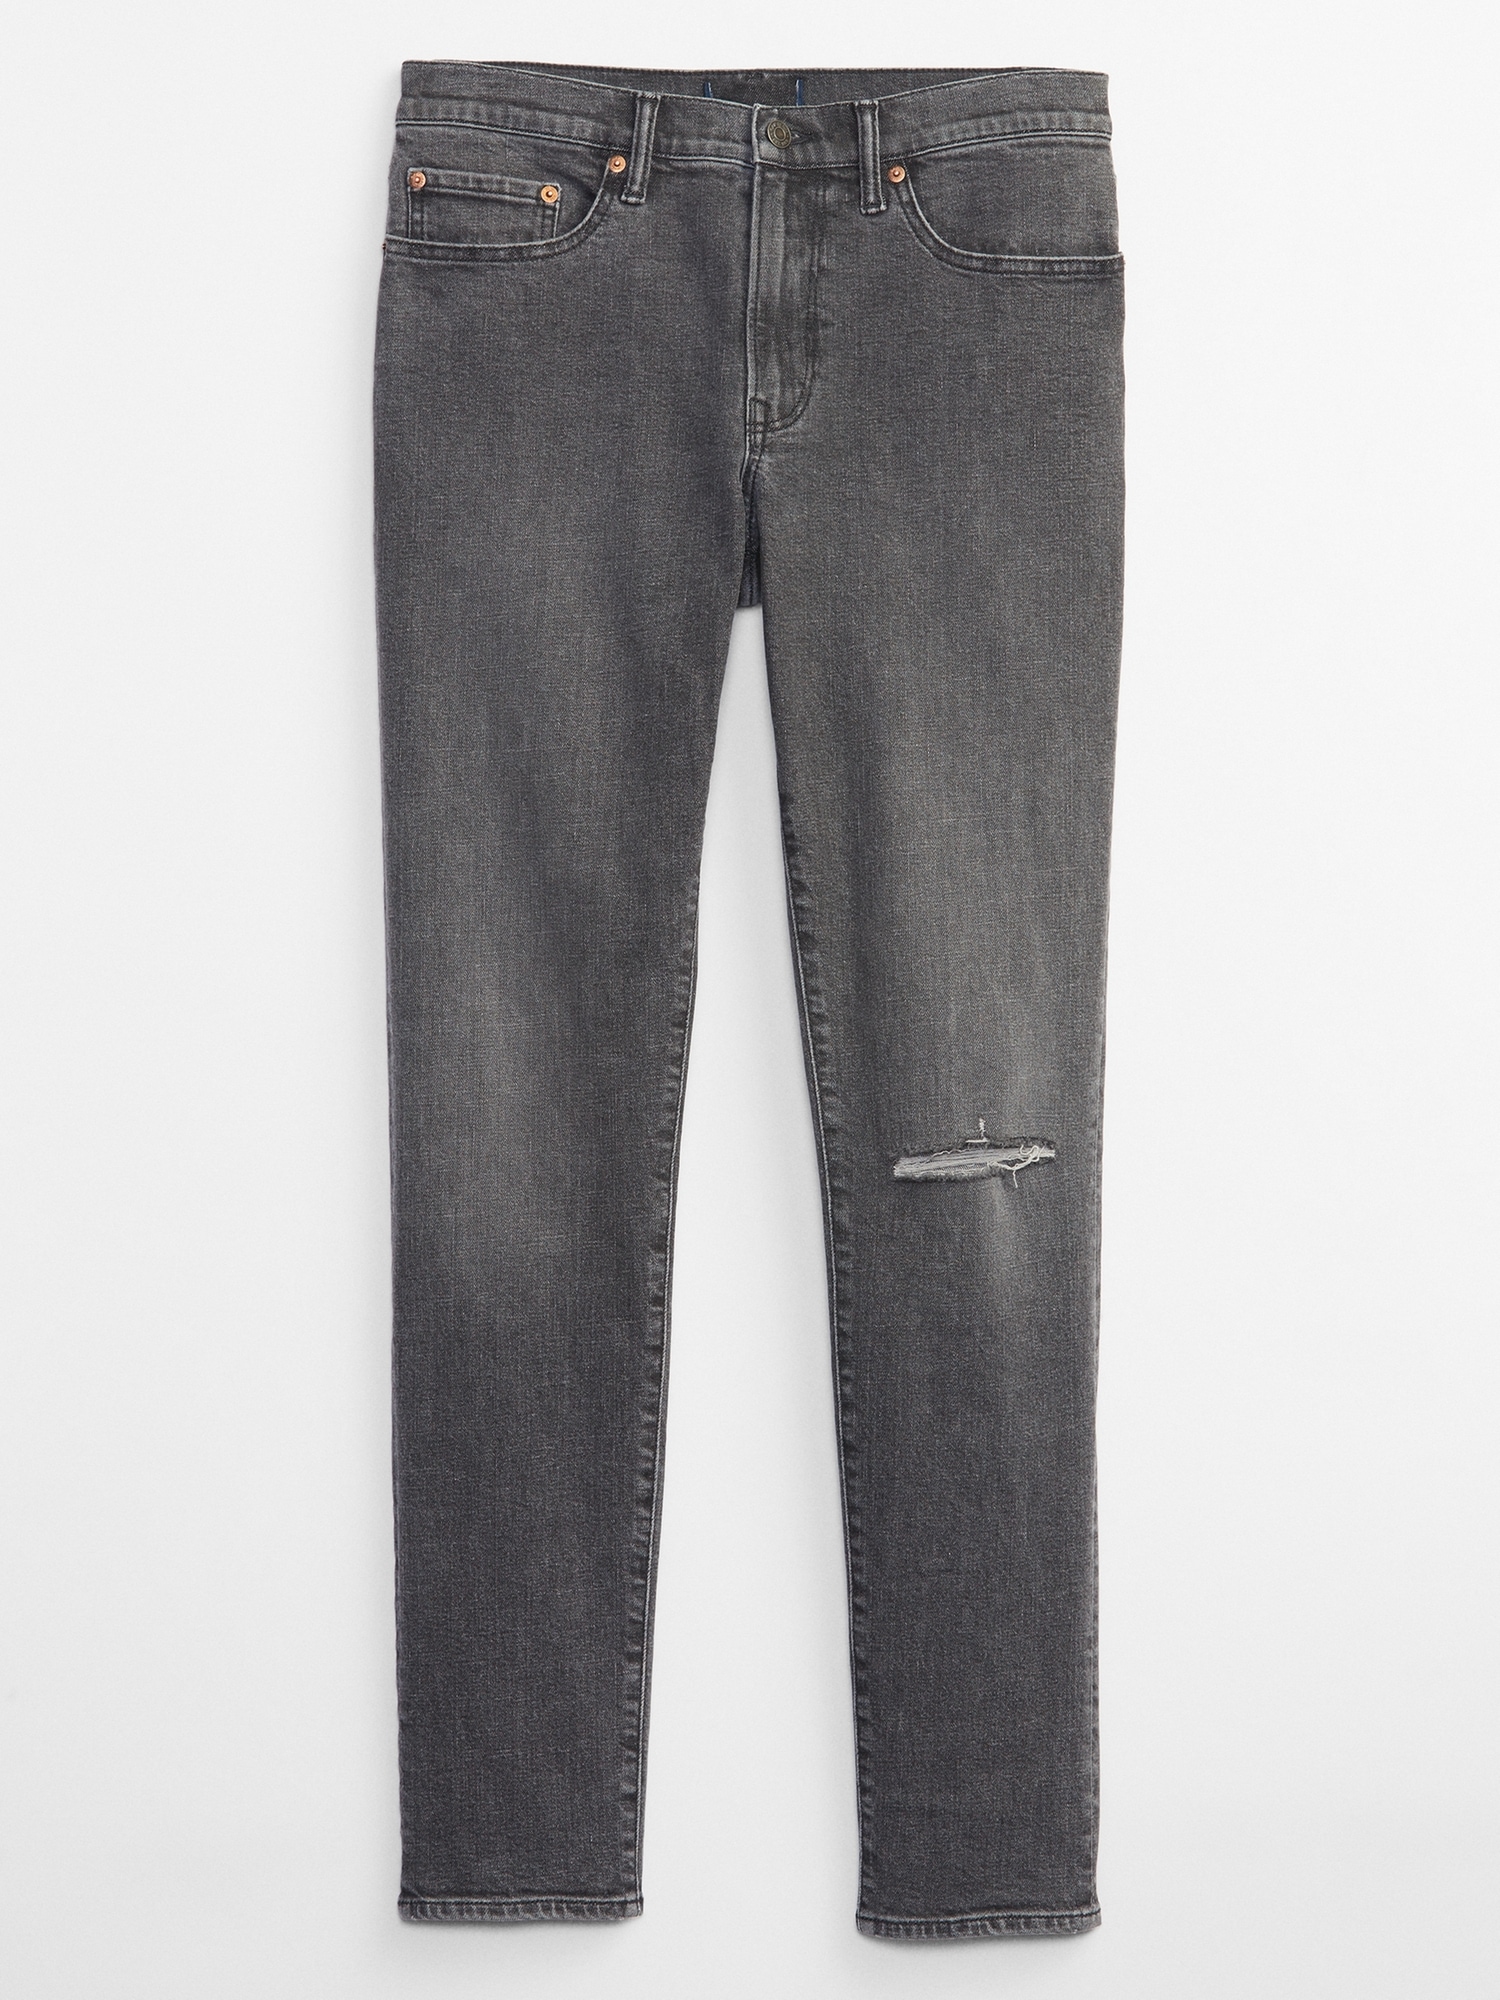 Slim Taper Gapflex Jeans With Washwell Washed Black